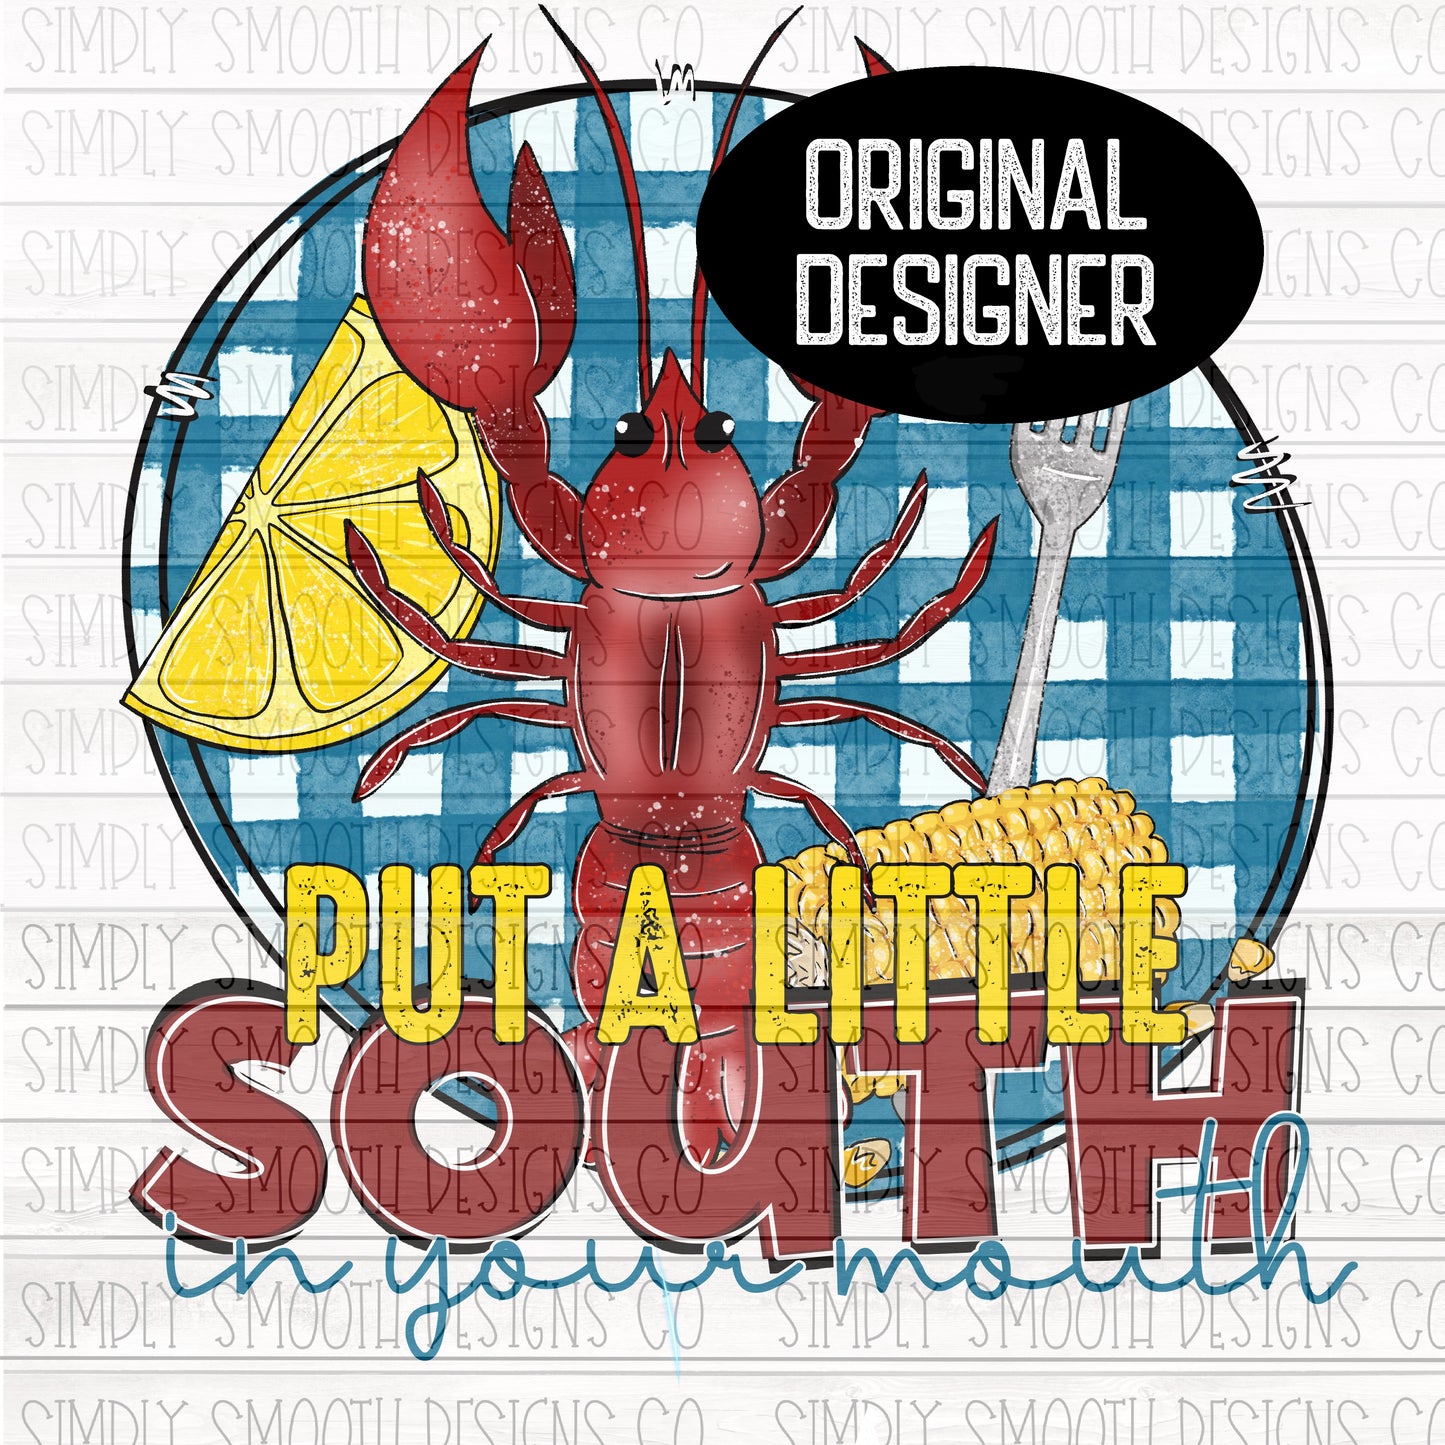 Put a little south in your mouth crawfish